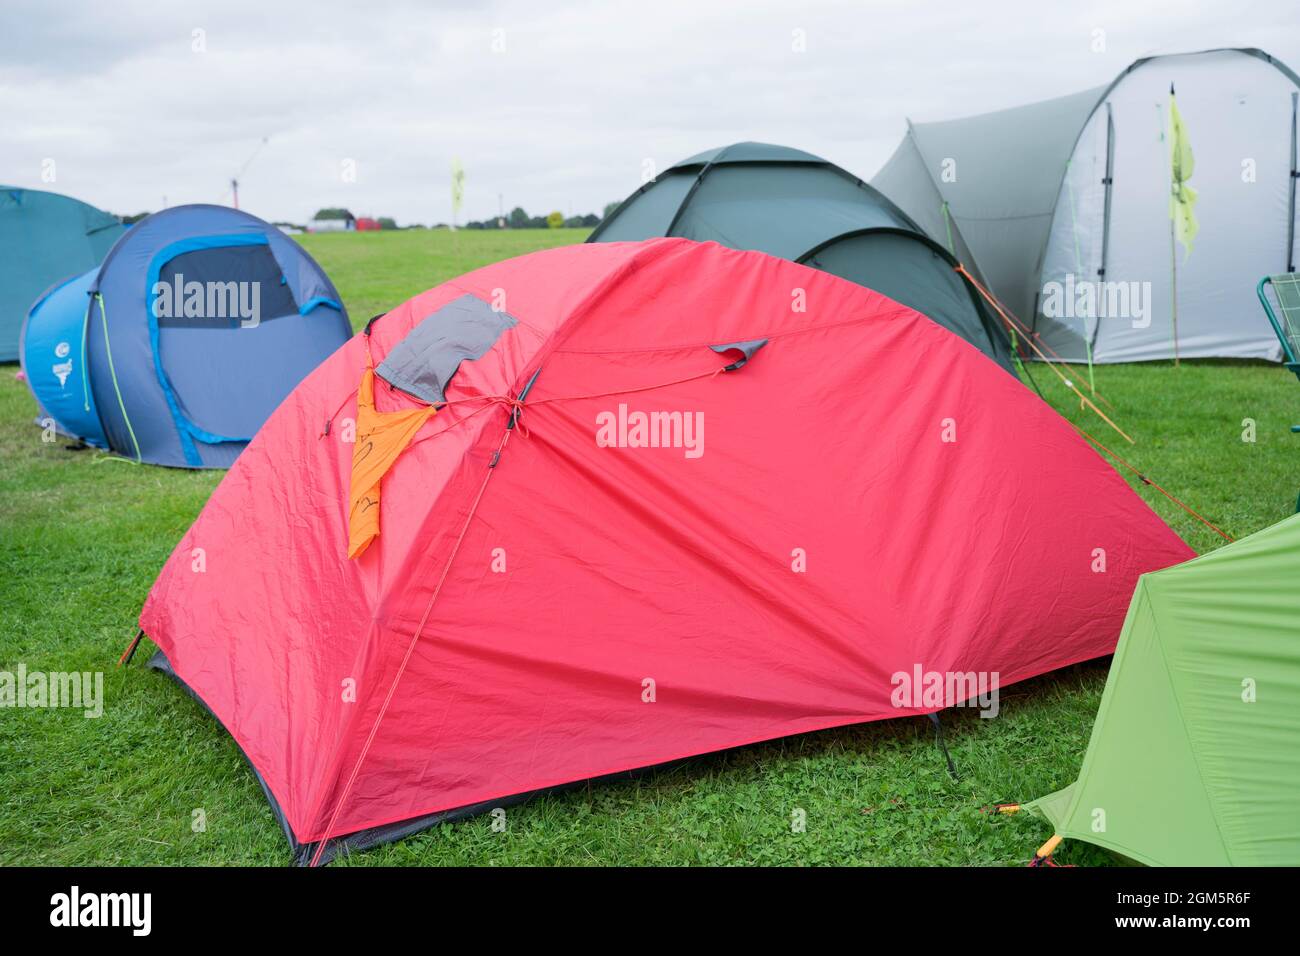 Blackheath common has turned into camping site with colourful tents of  different shapes and sizes, England UK Stock Photo - Alamy